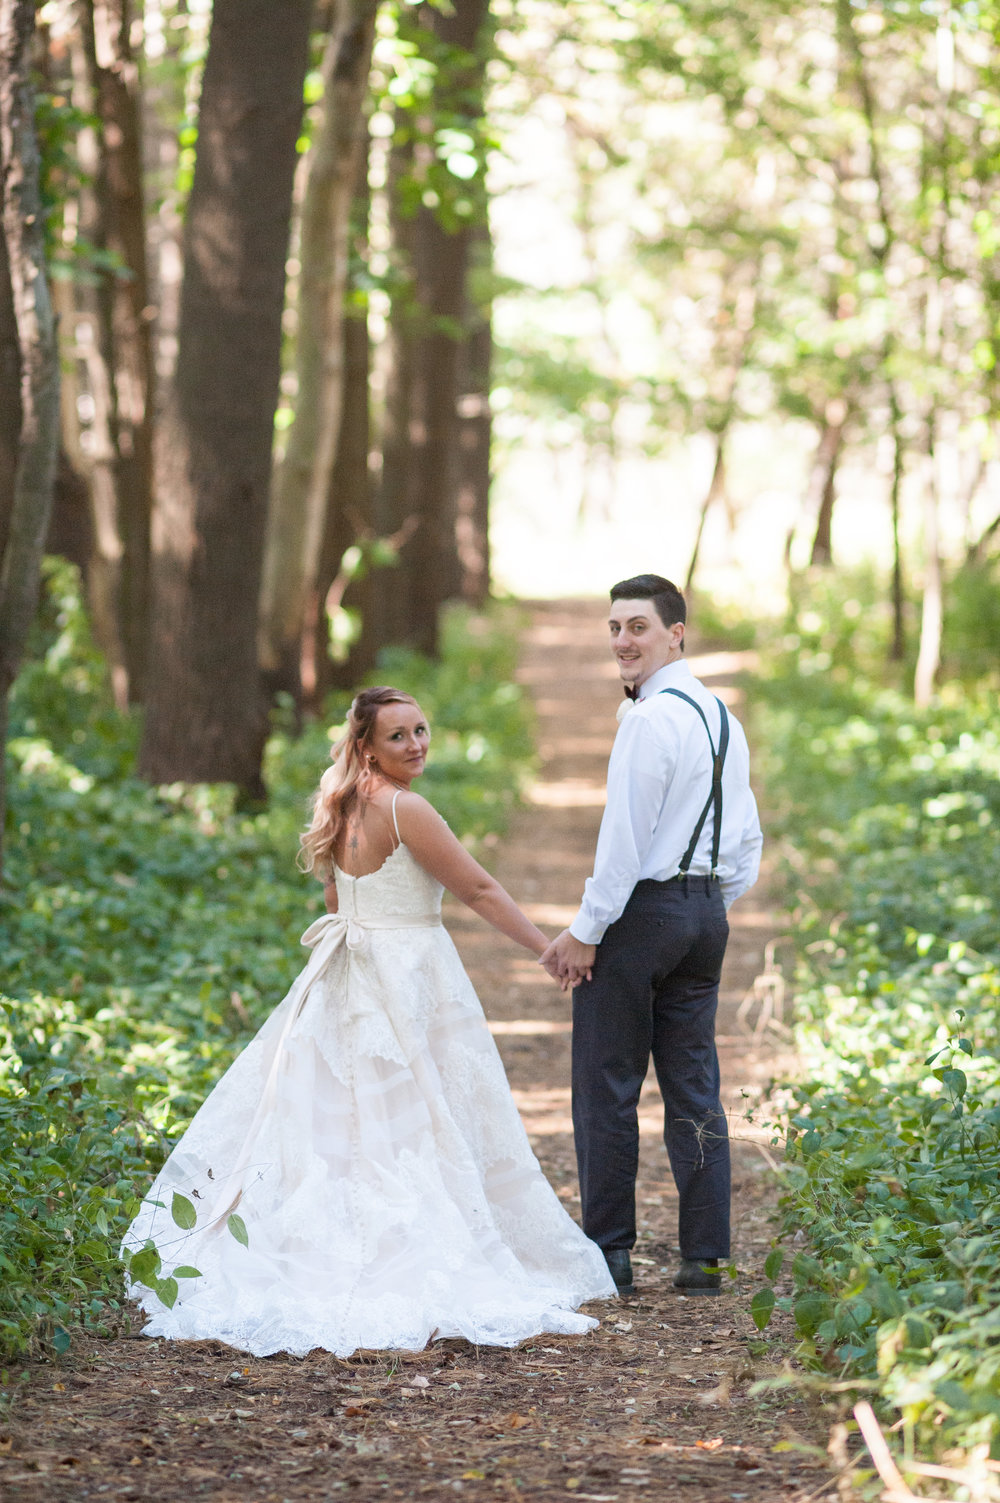 Anna & Zach {Westminster Chapel Wedding in Rochester, NY} - Blog ...